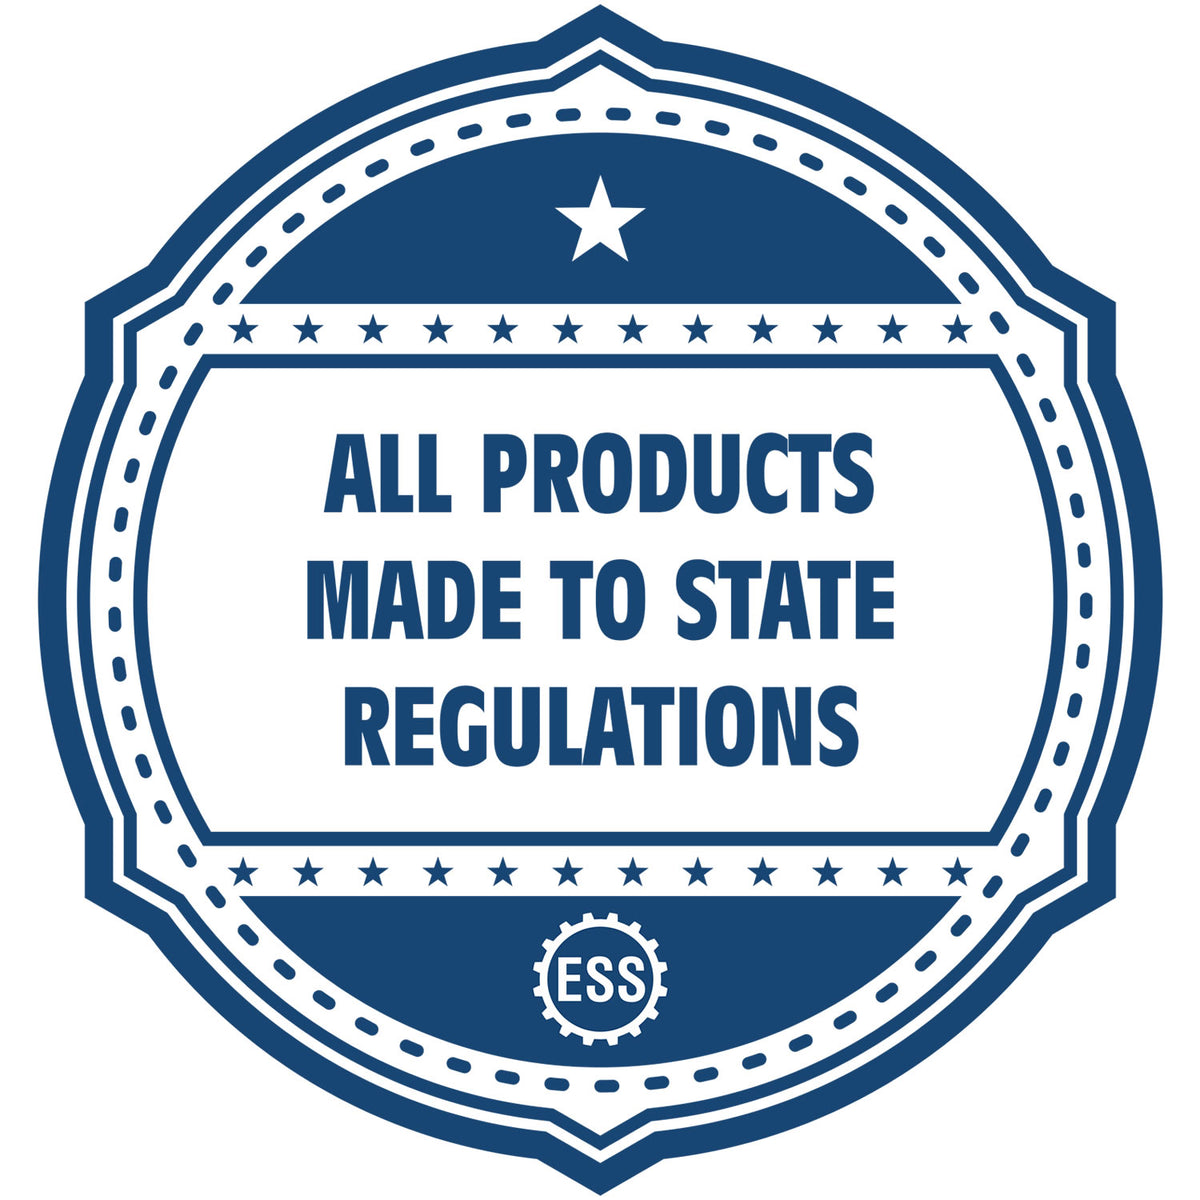 An icon or badge element for the Handheld Texas Professional Engineer Embosser showing that this product is made in compliance with state regulations.